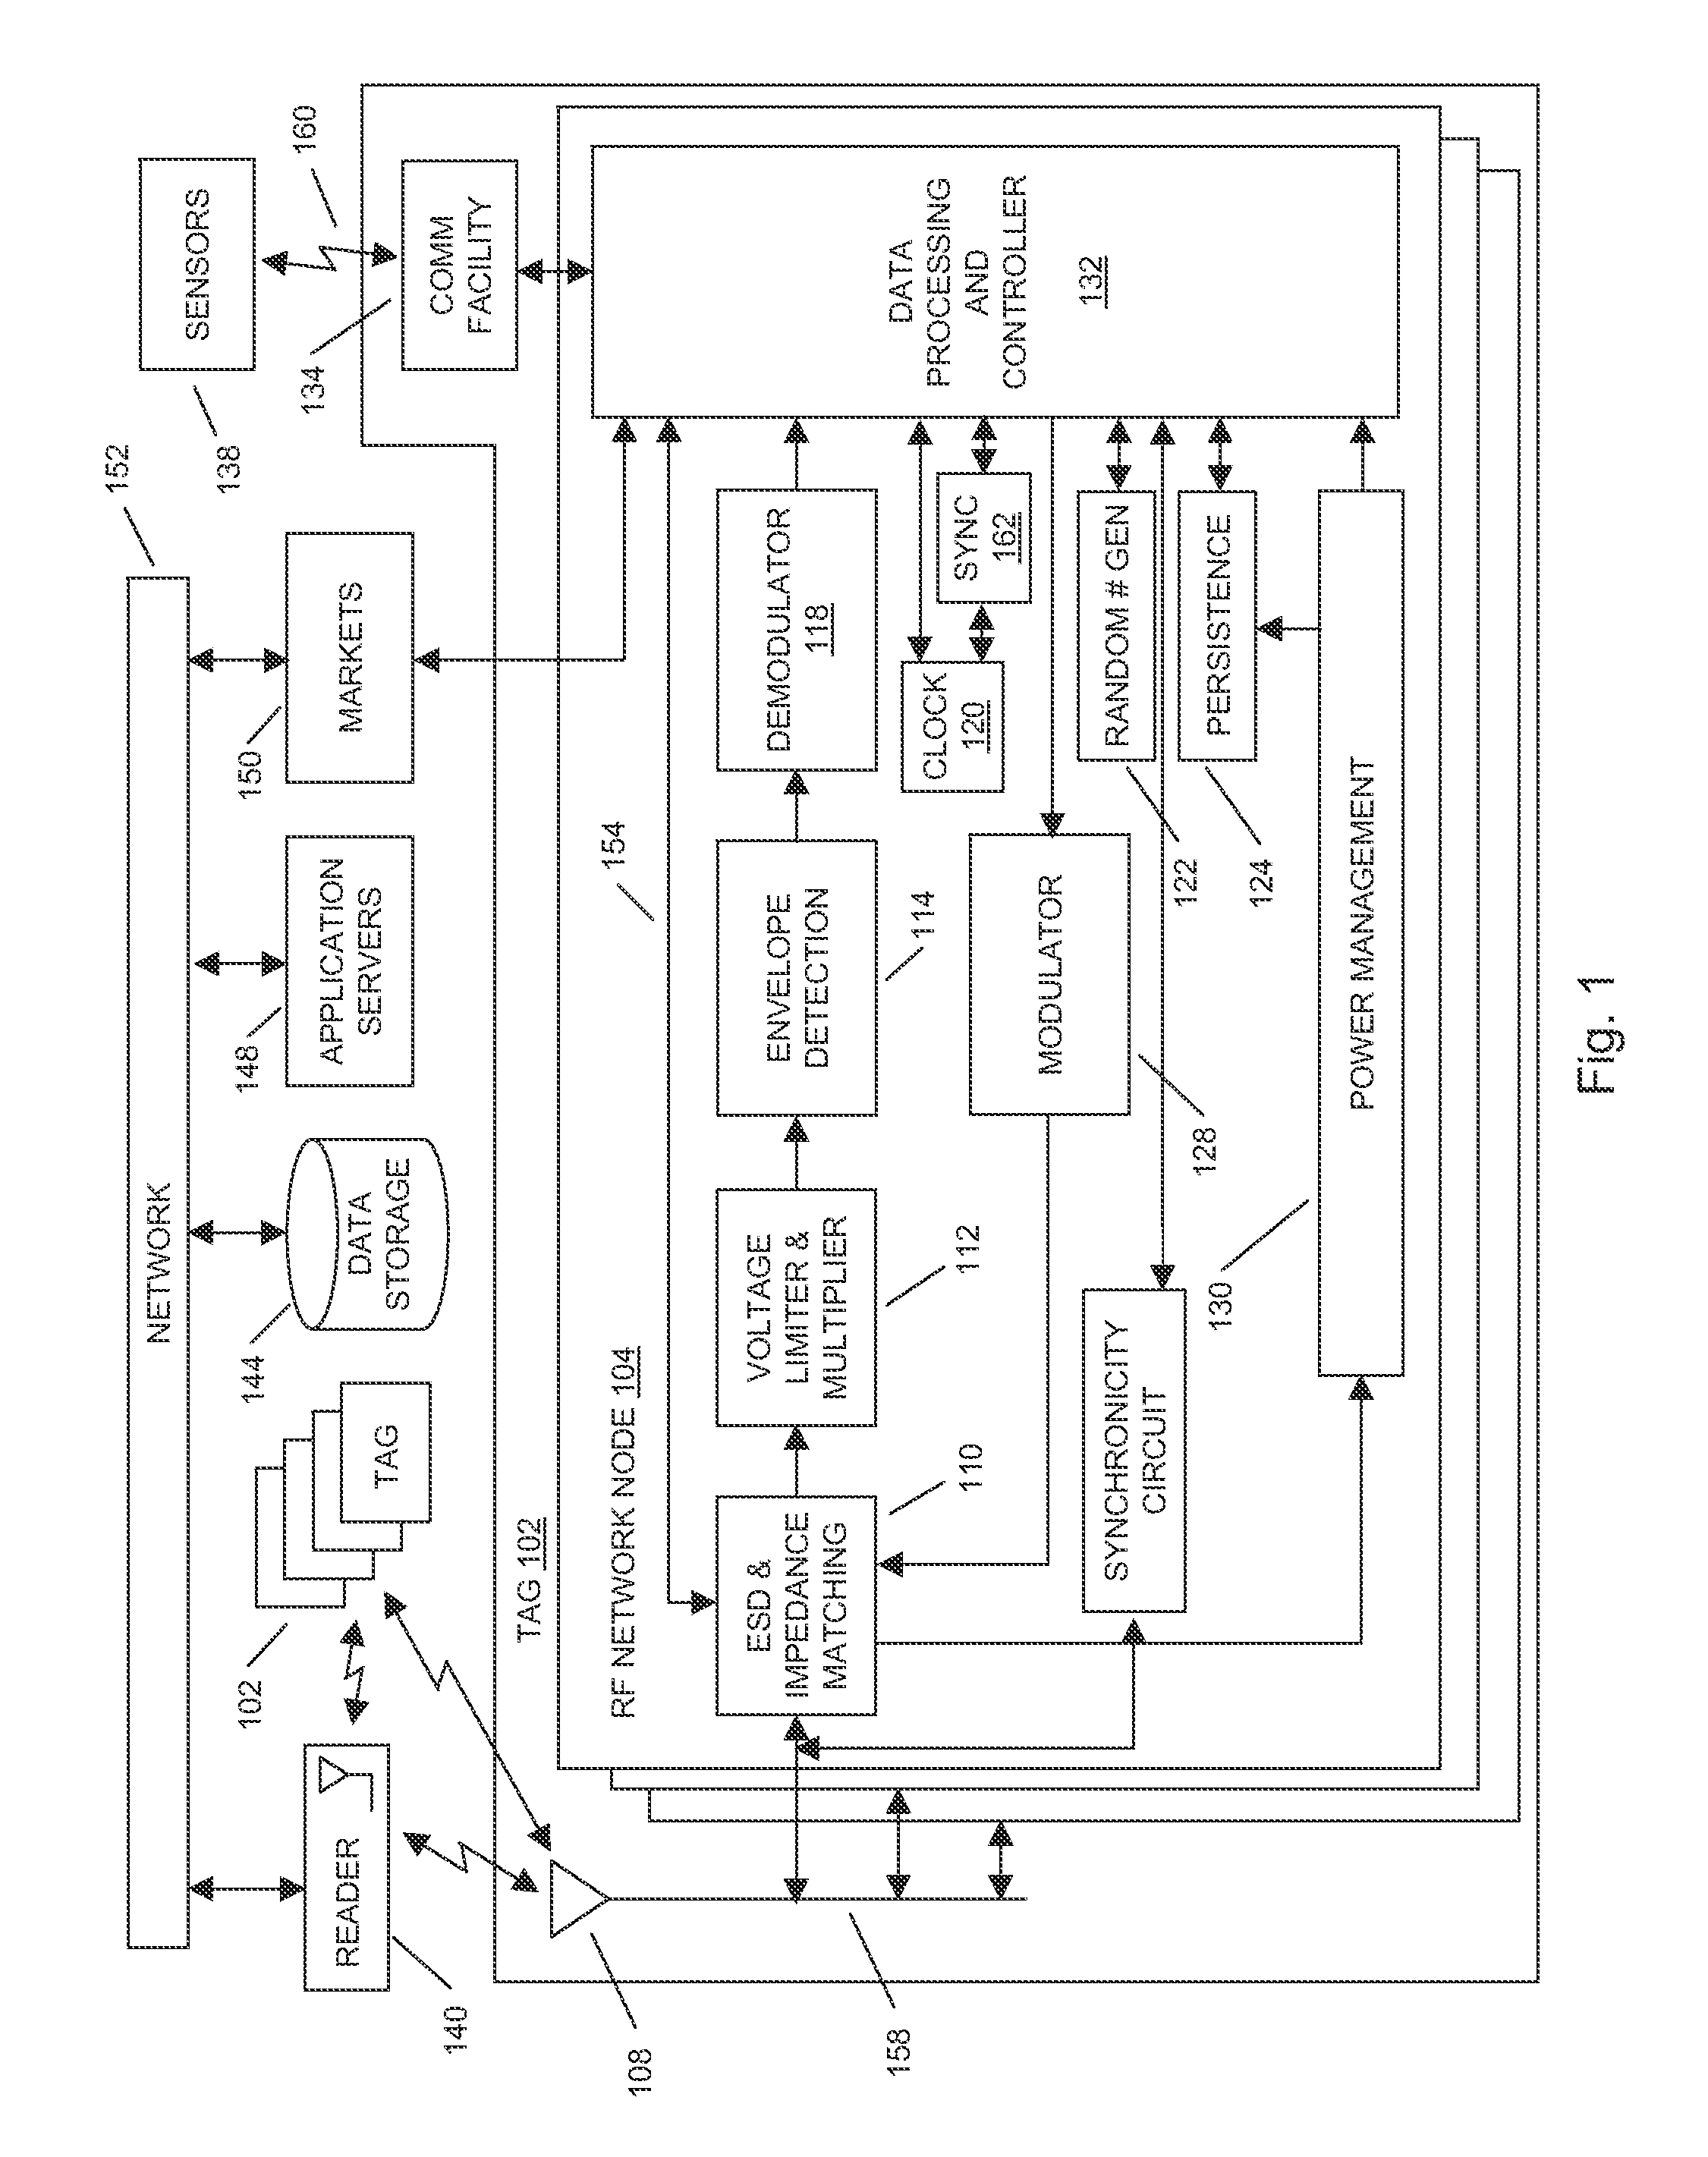 Method for memory mapping in a composite RFID tag facility